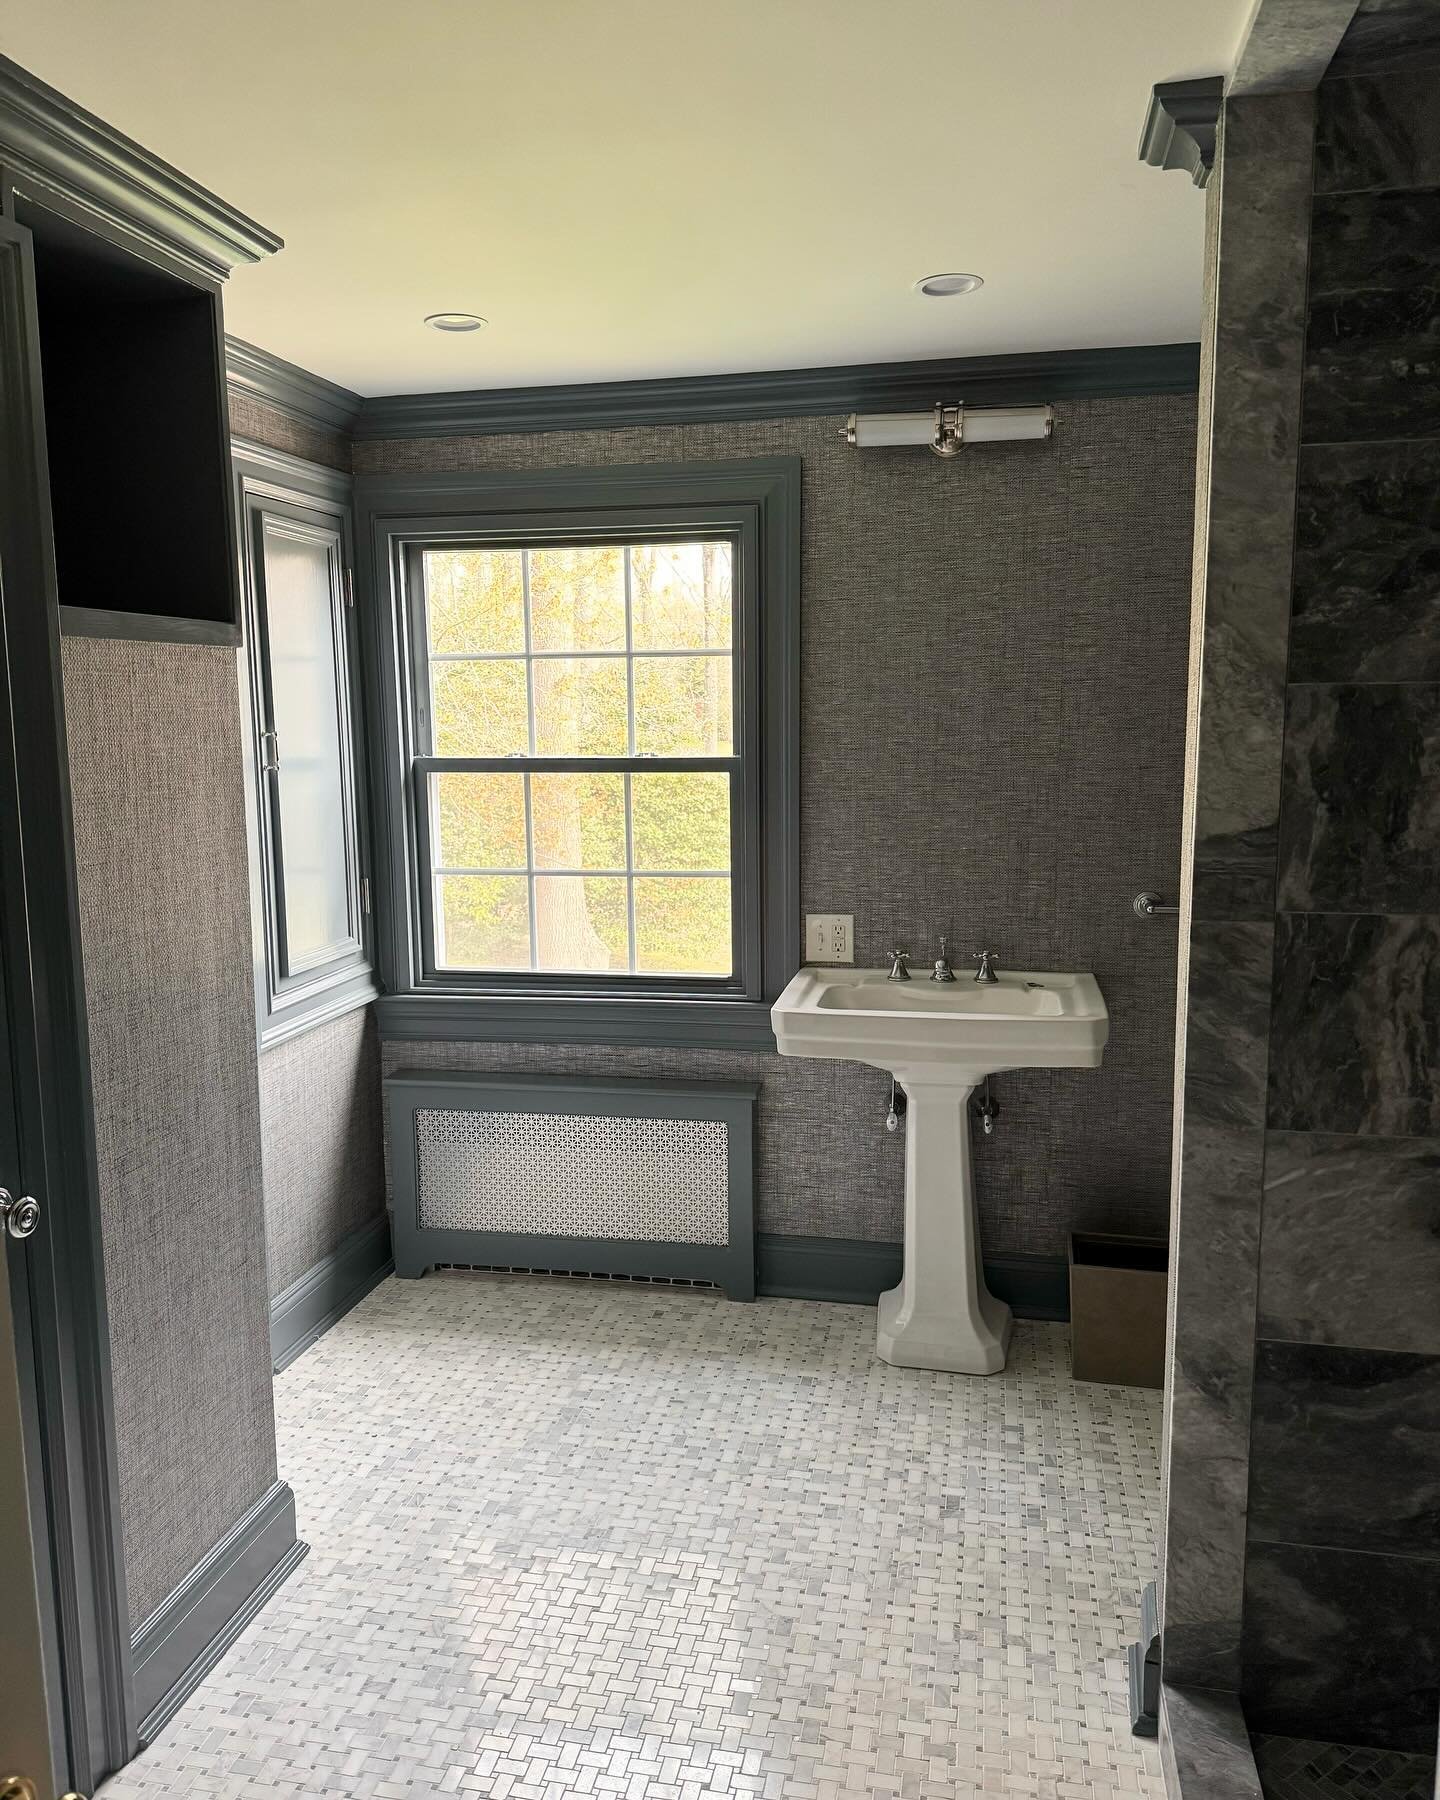 &ldquo;HIS&rdquo; Bathroom renovation almost complete using Bardiglio marble tile, a handsome blue-grey grasscloth, and washing all the trim in Britannia Blue 💙🖤#deepdalehousellc